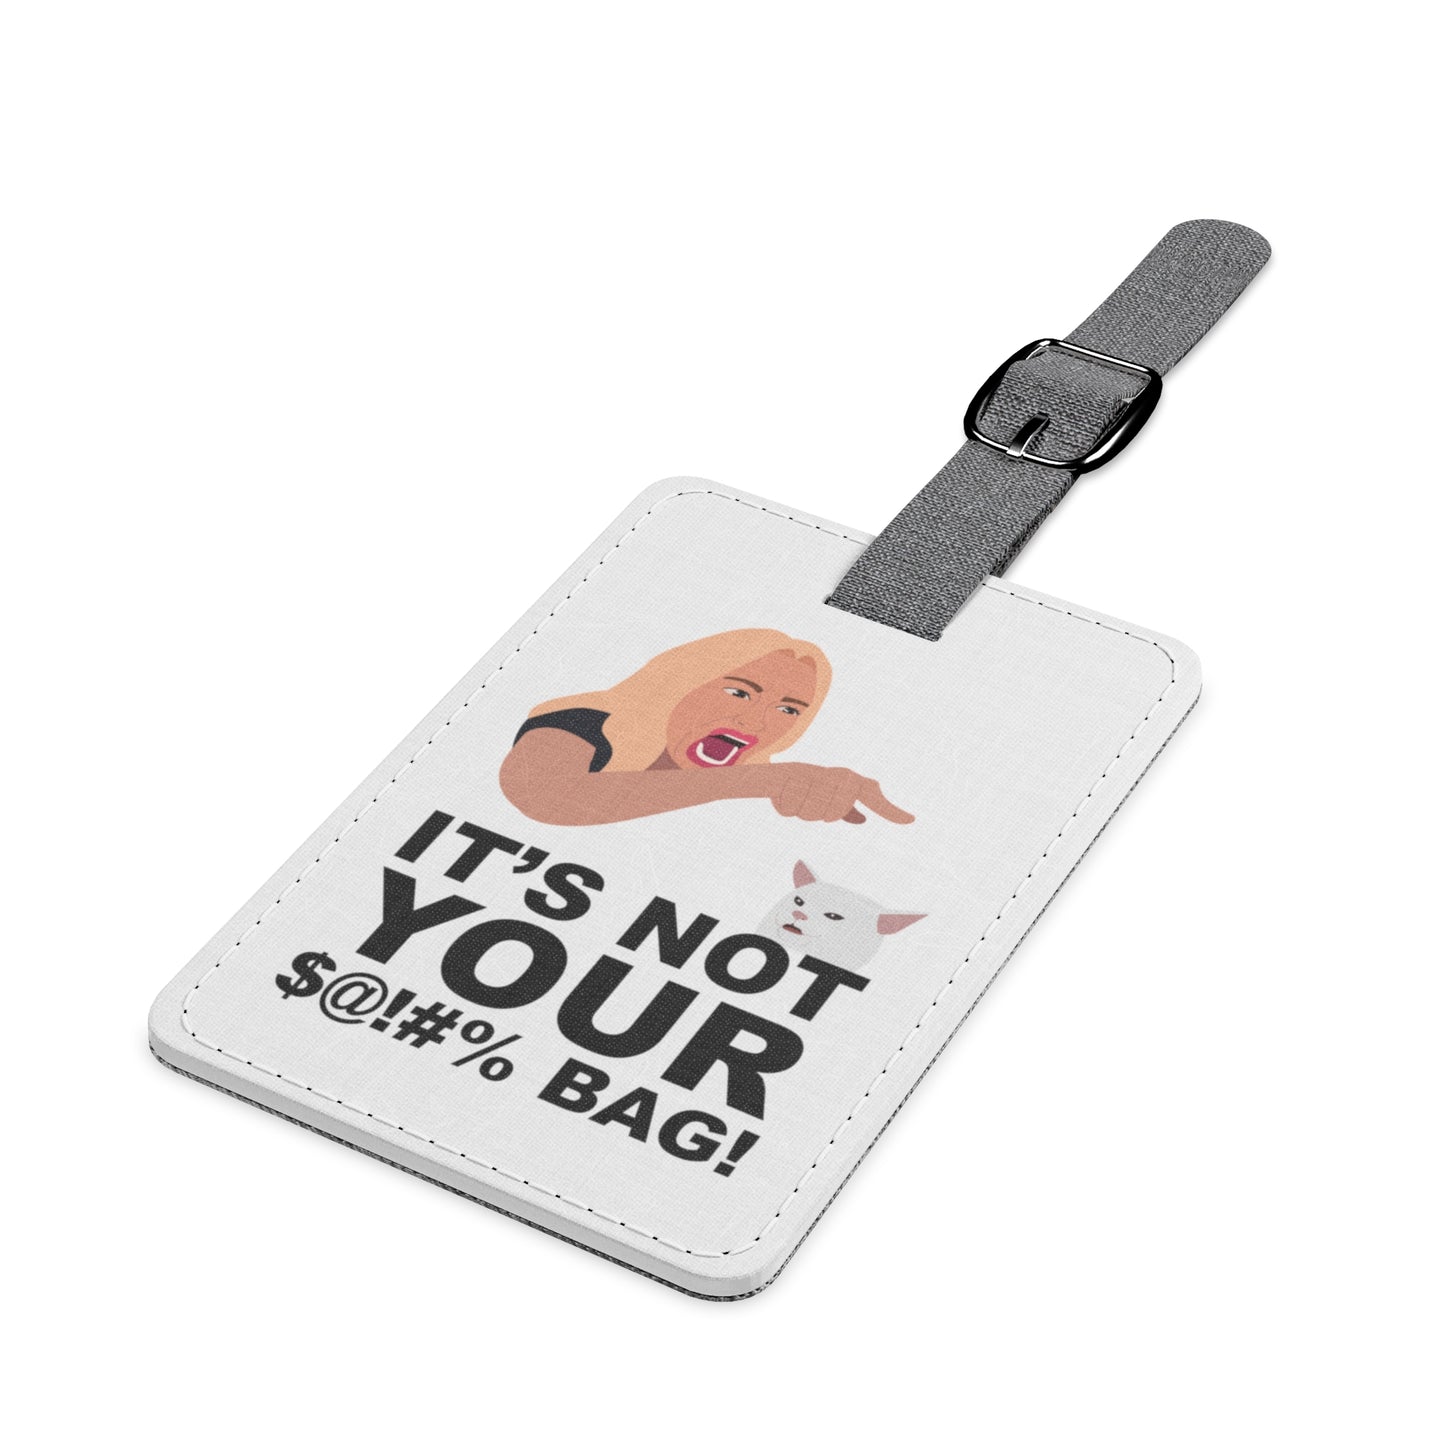 It's Not Your $@!#% BAG!–Saffiano Polyester Luggage Tag, Rectangle